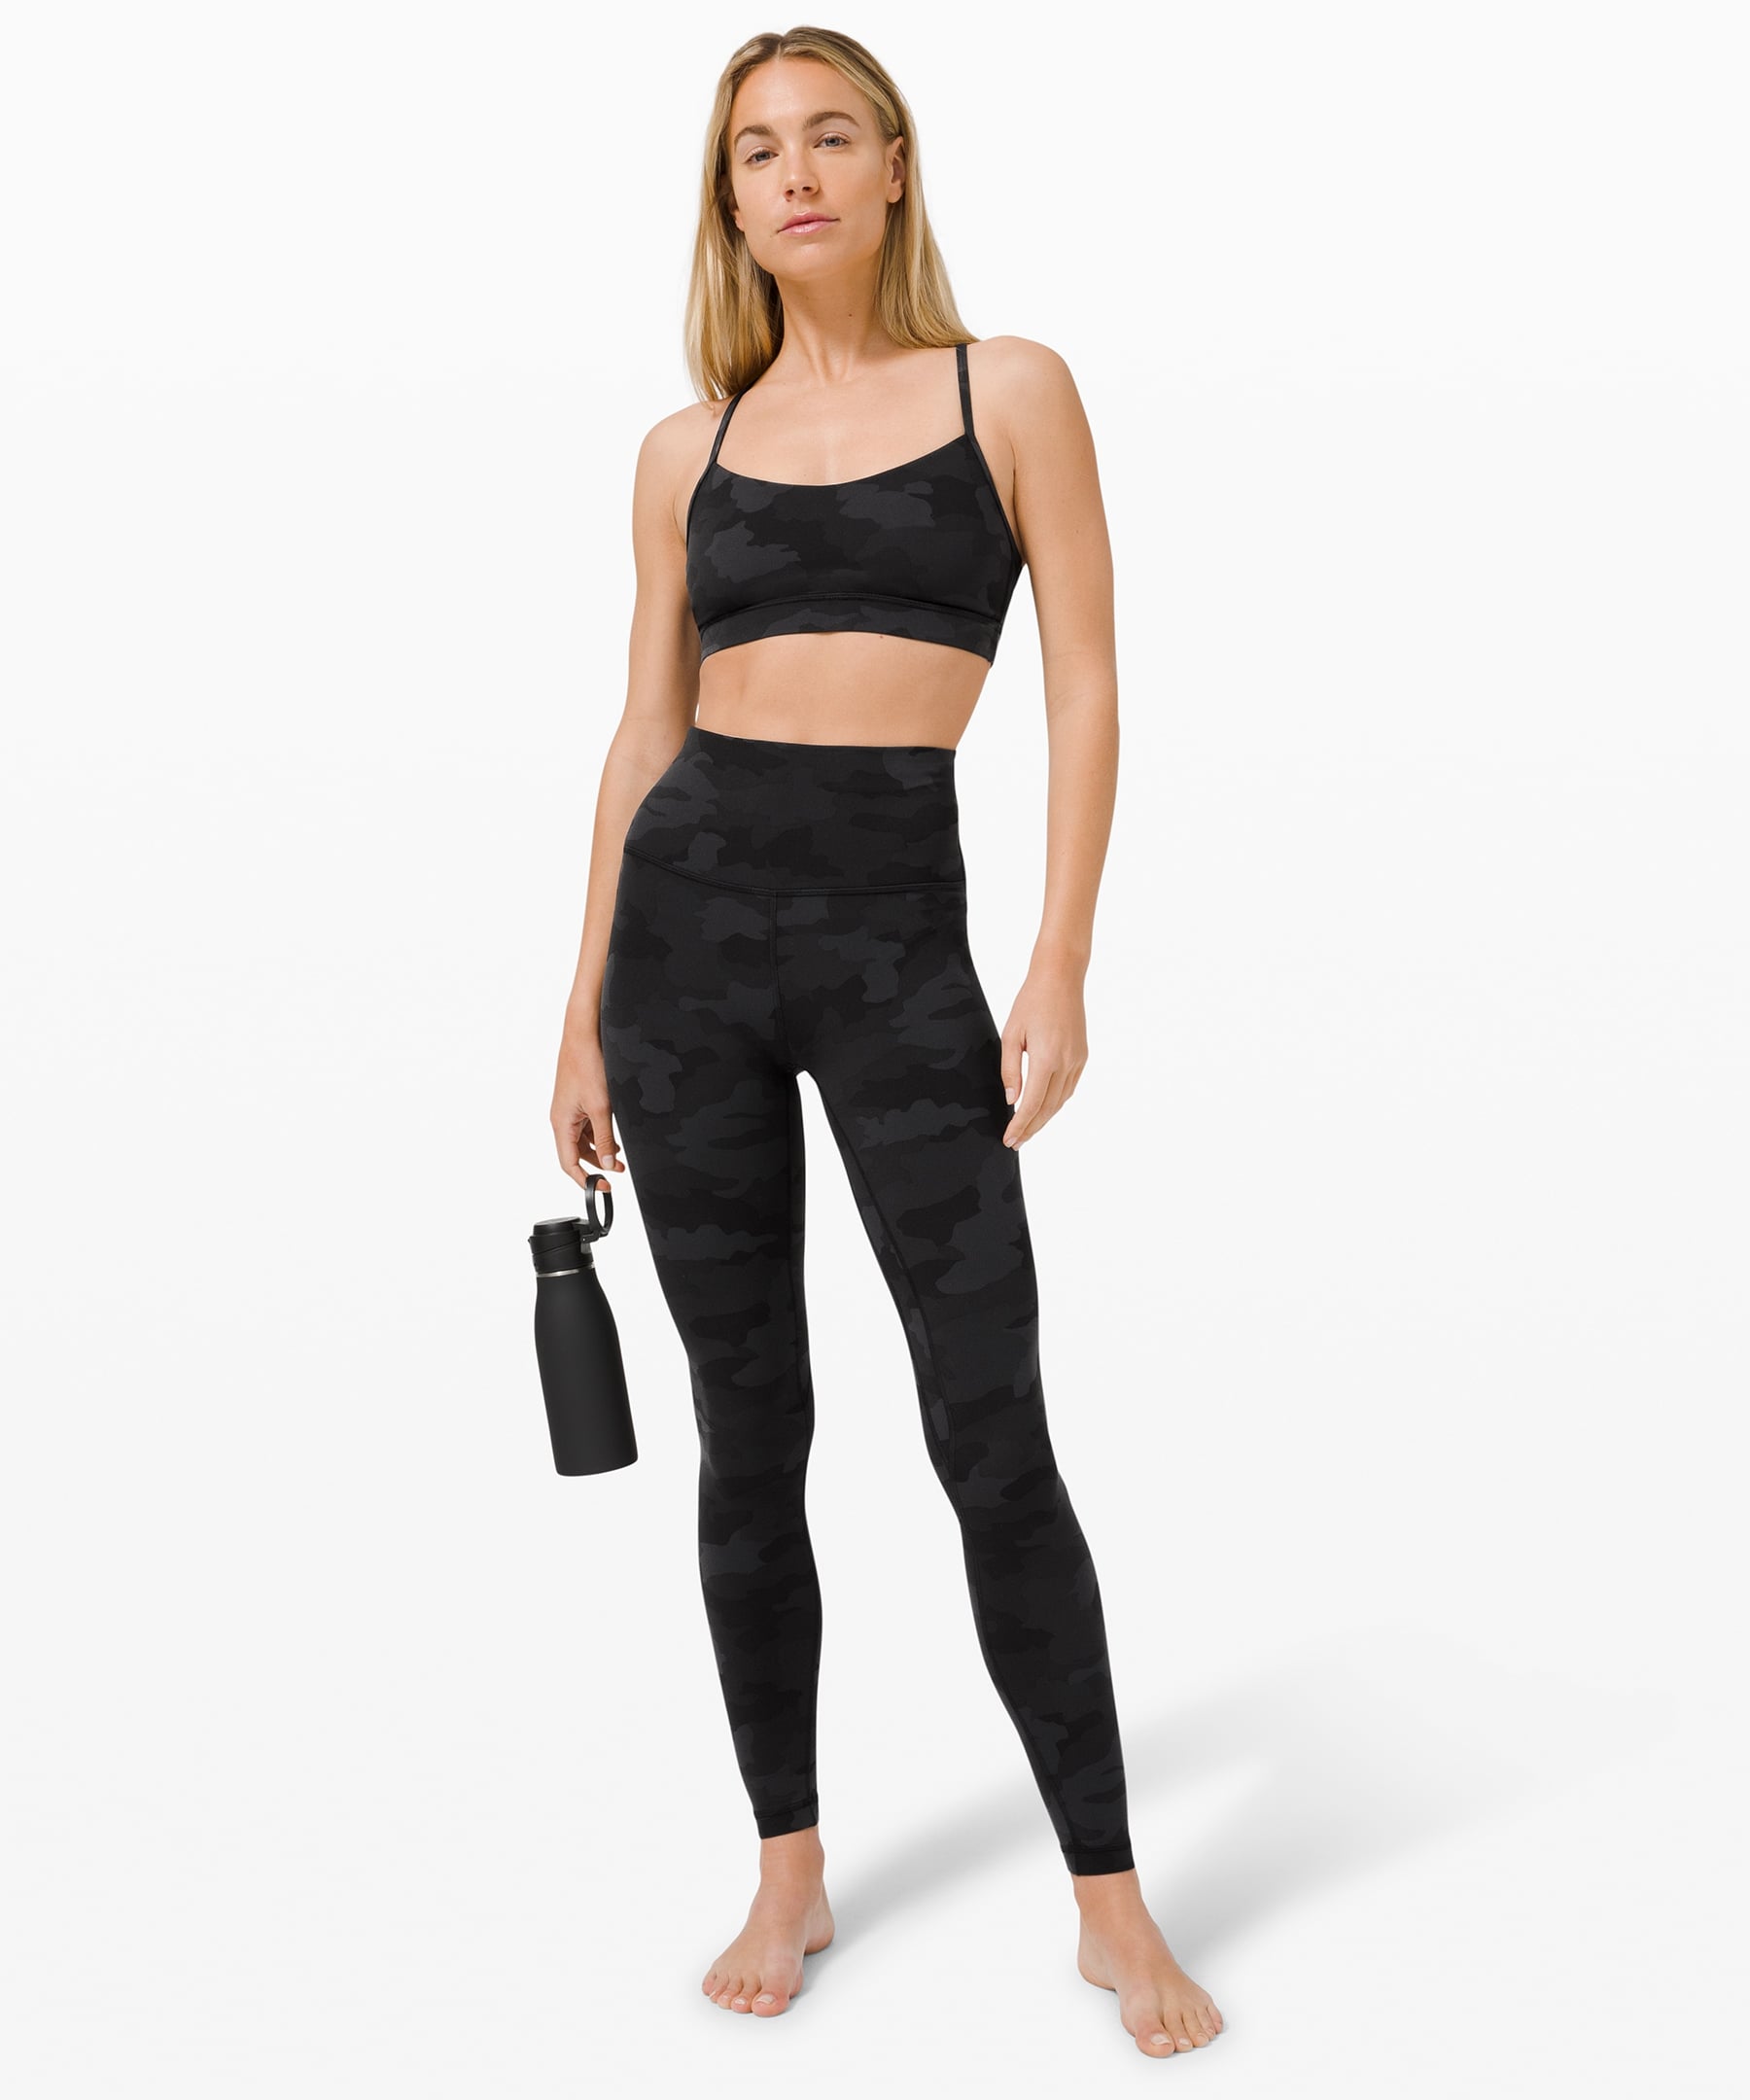 Lululemon Flow Y Bra Nulu and Invigourate High-Rise Tight, 13 Matching  Sets You Can Shop at Lululemon, Because Your Shades of Black Should Match